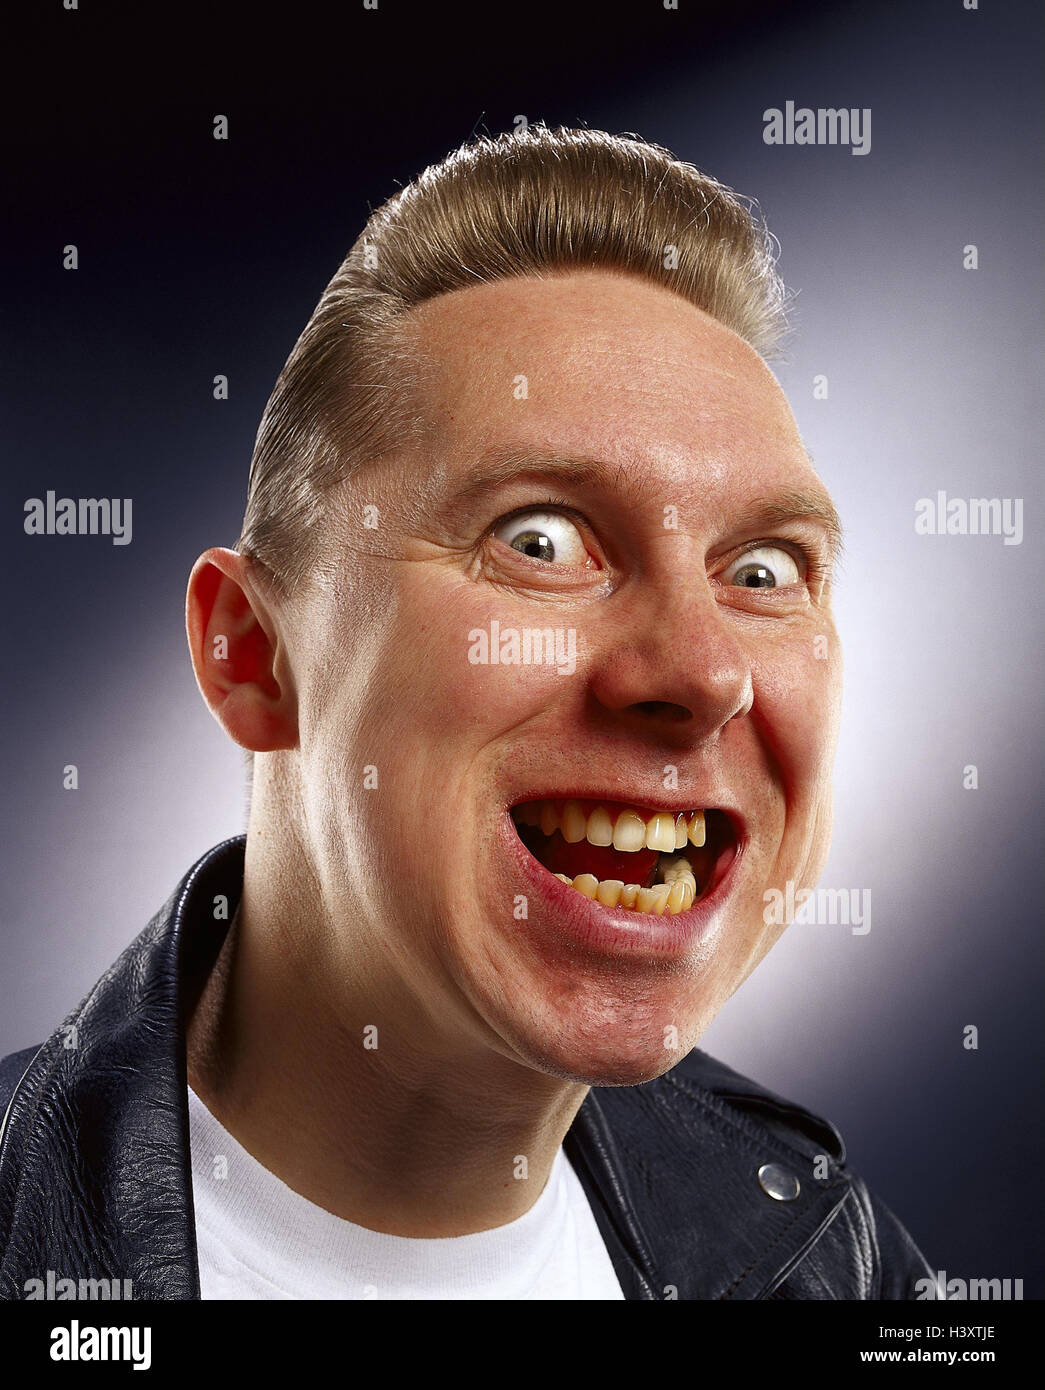 Man, laugh young, leather ball jacket, facial play, nasty, gloating, portrait, Men, studio, hairs, blond, grimace, joy, view, moves, chaotically, crazily, malicious pleasure, near, Stock Photo